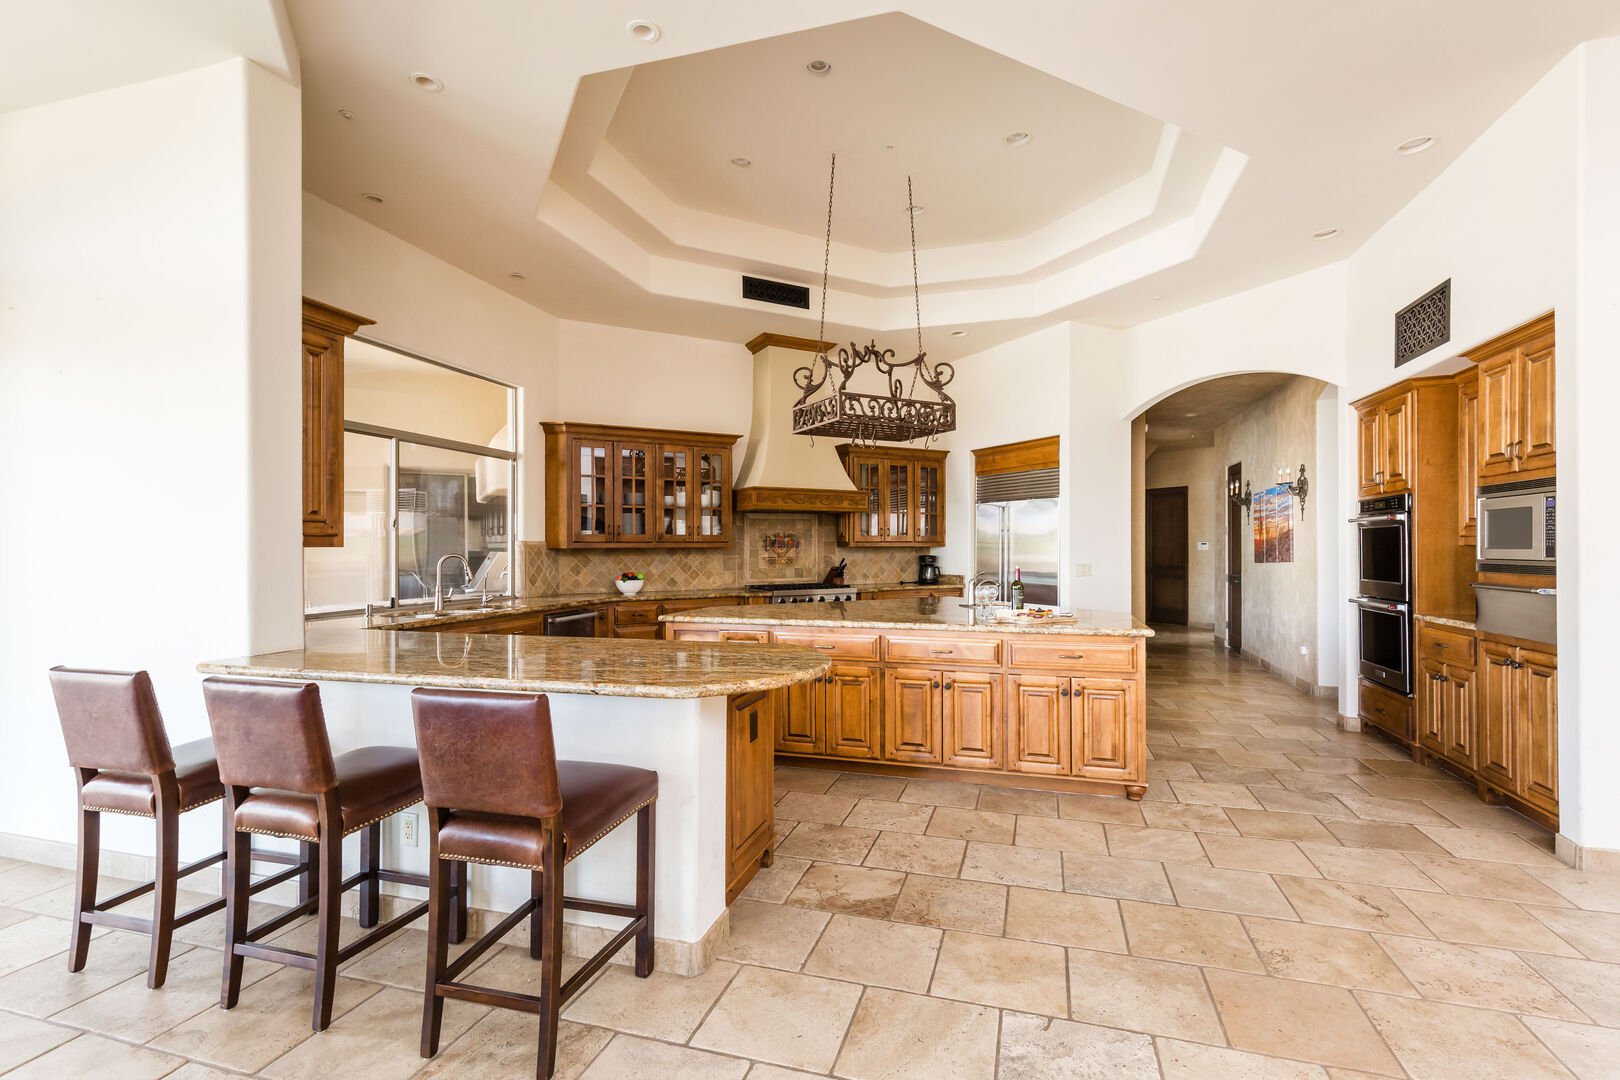 The kitchen is a chef's dream, with stainless-steel appliances, a large island with ample counter space, double oven, bar seating, and stocked with all culinary essentials.